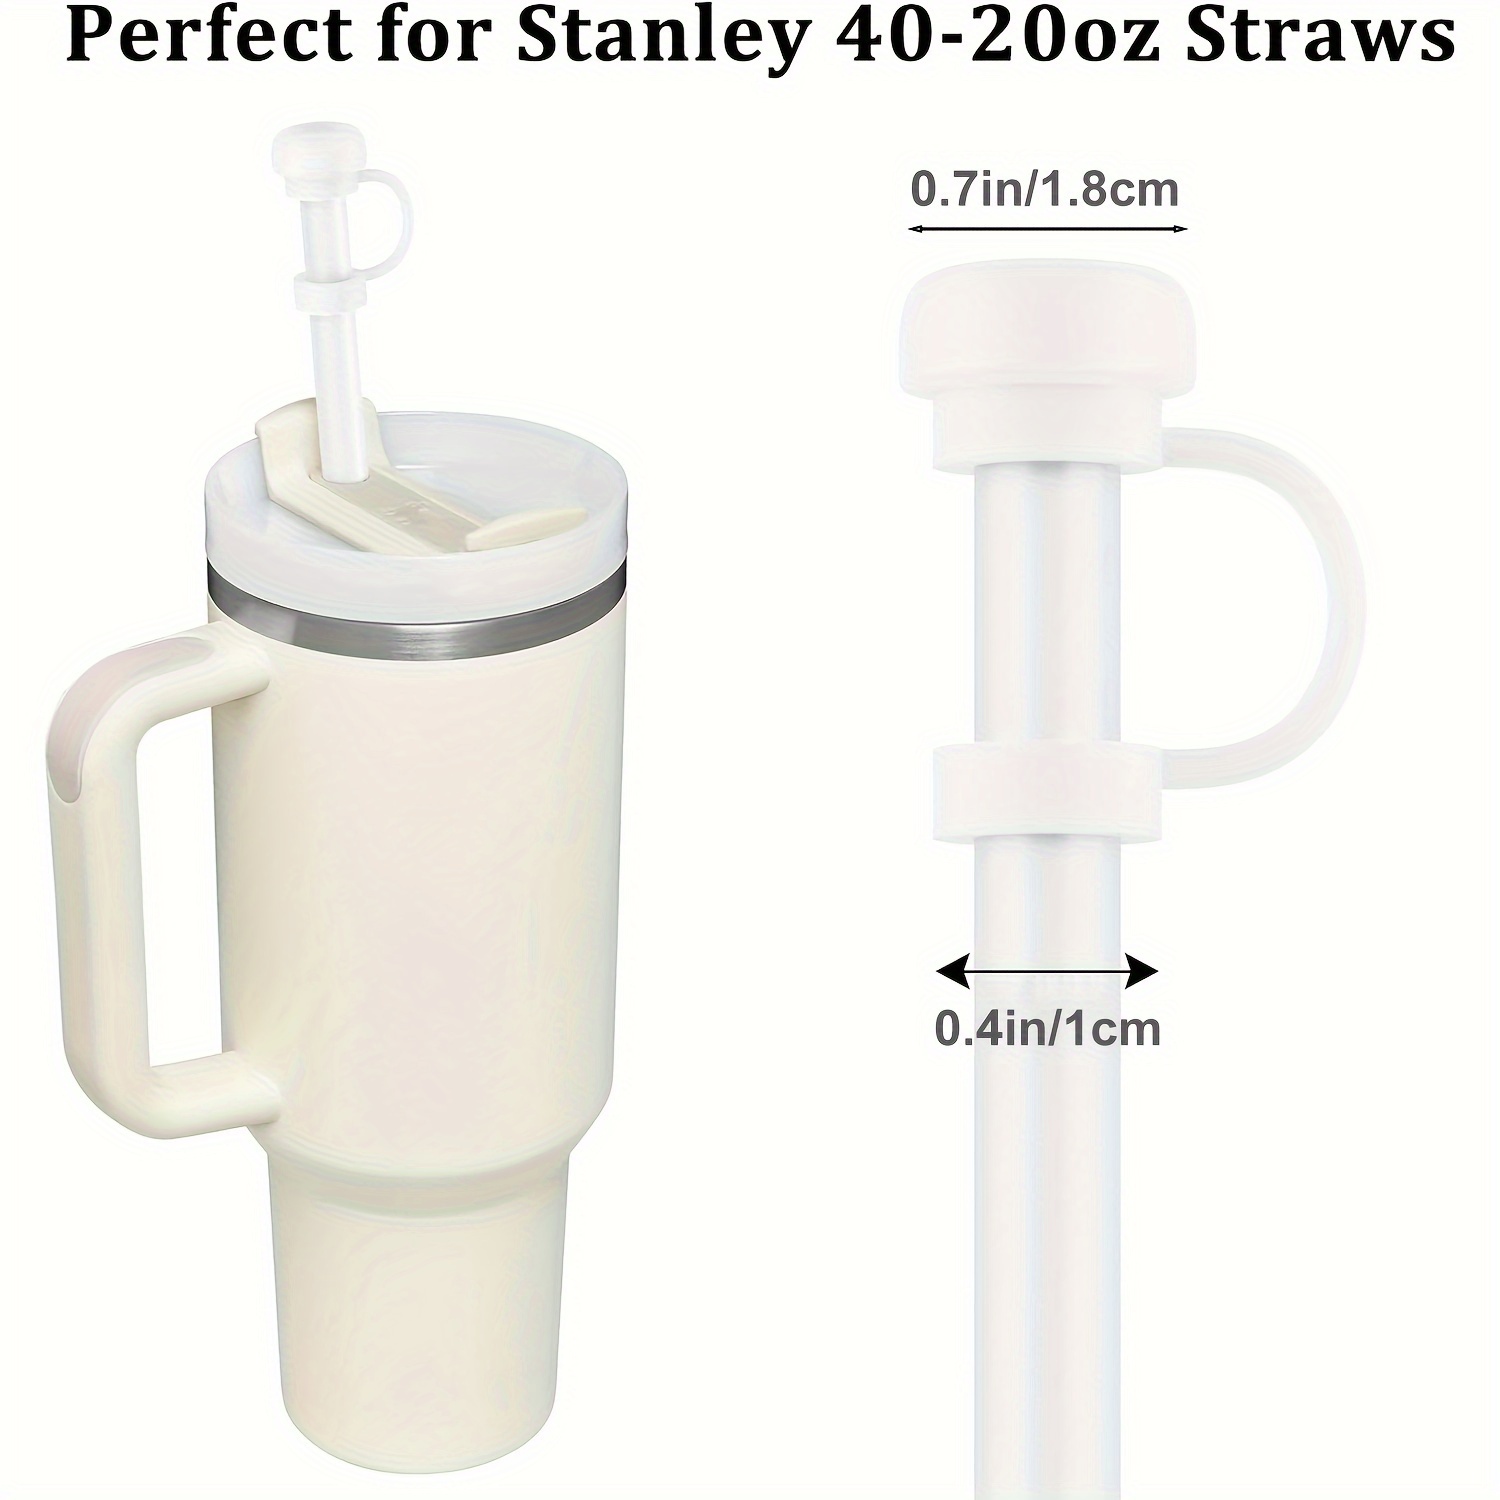 Straw Cover, 4 PCS Stanley Straw Cover, Stanley Cup Accessories